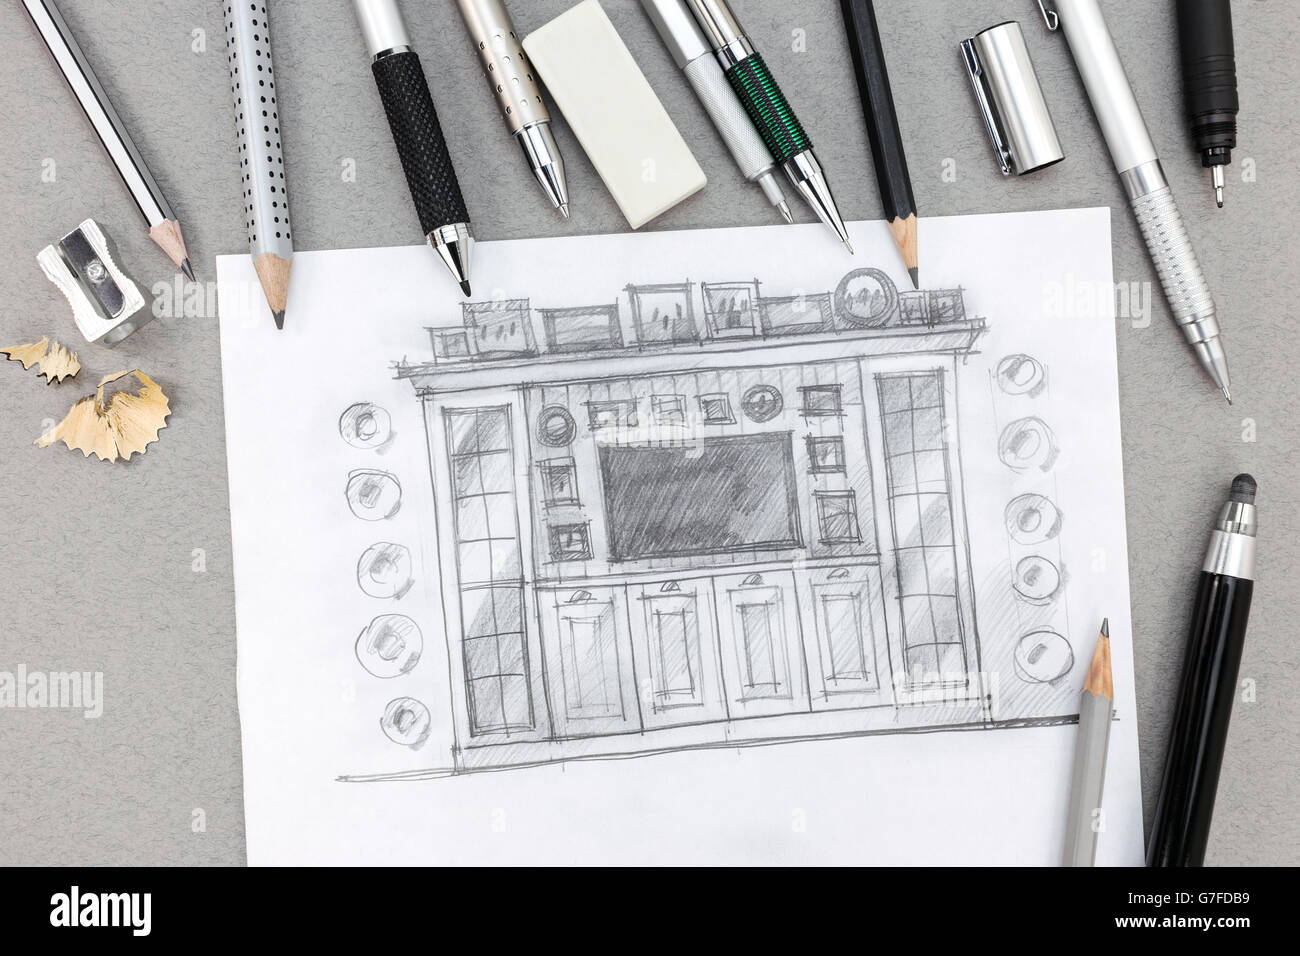 freehand sketch design of wall unit with pens and pencils on desk Stock Photo